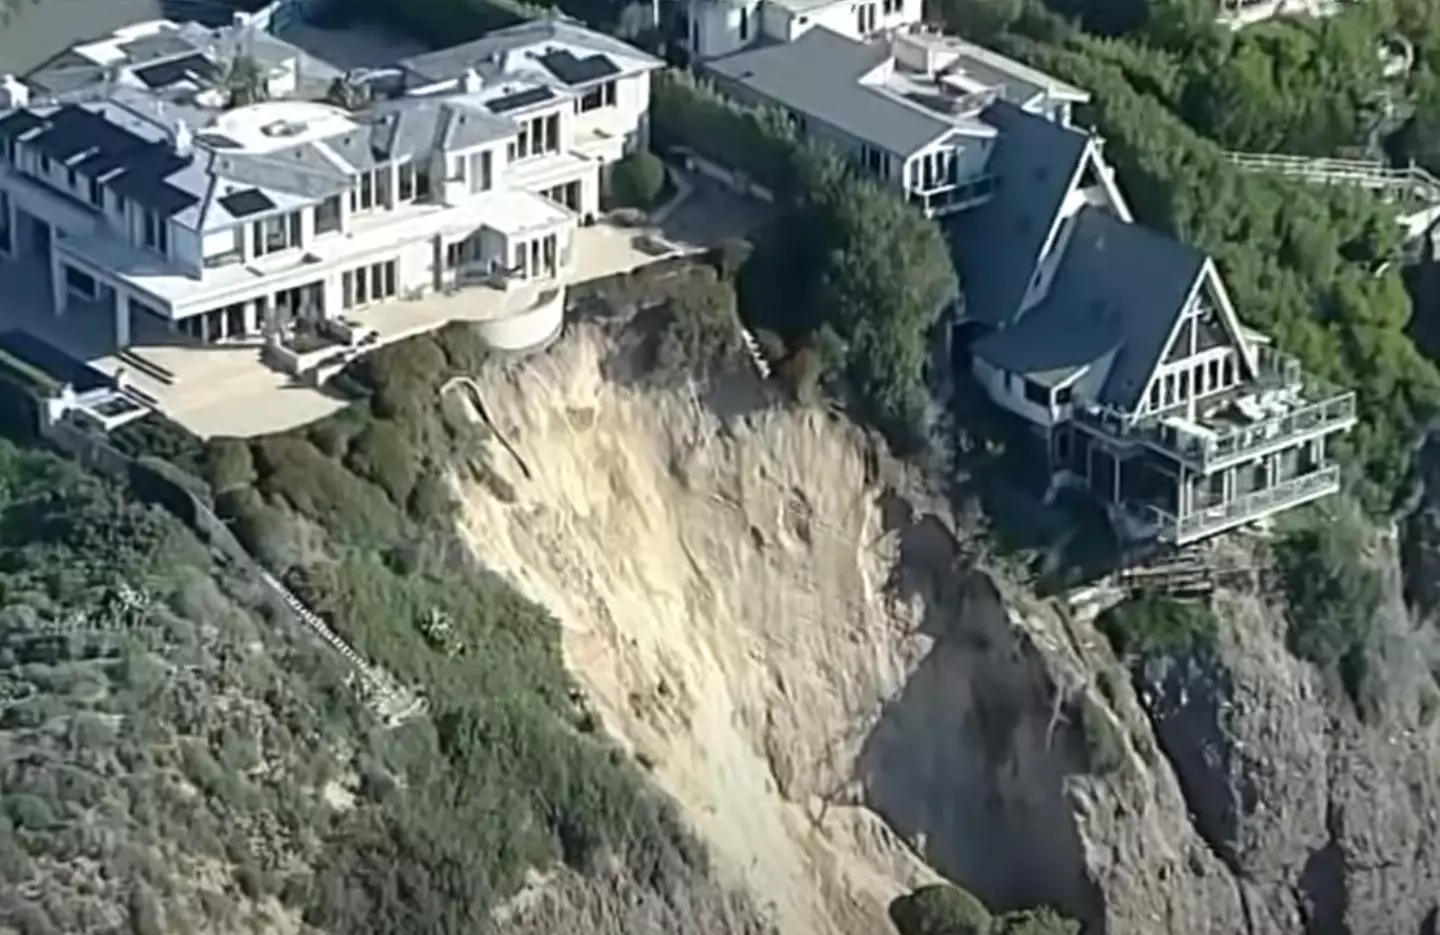 One house looks like it's almost dangling off the cliff slightly.